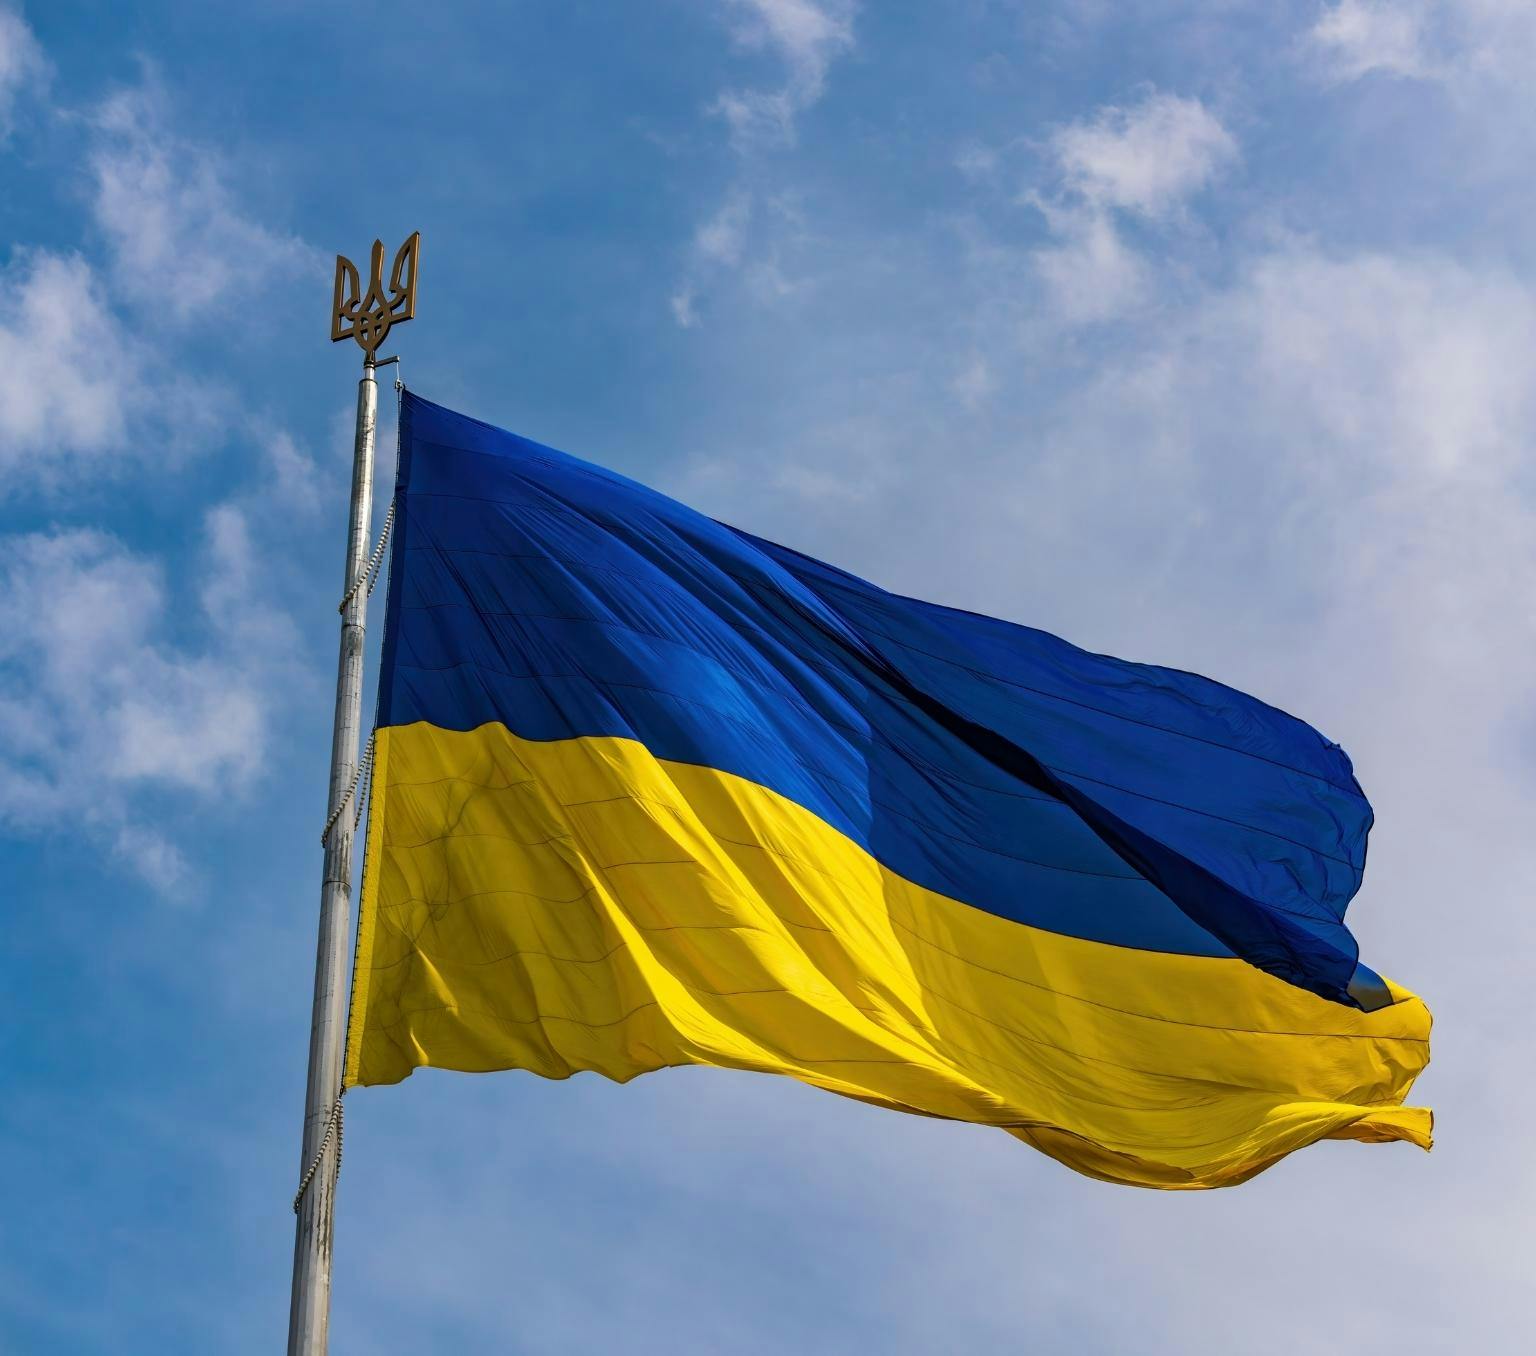 Ukraine flag flying on a mast in the sky. The flag is blue on the top and yellow on the bottom